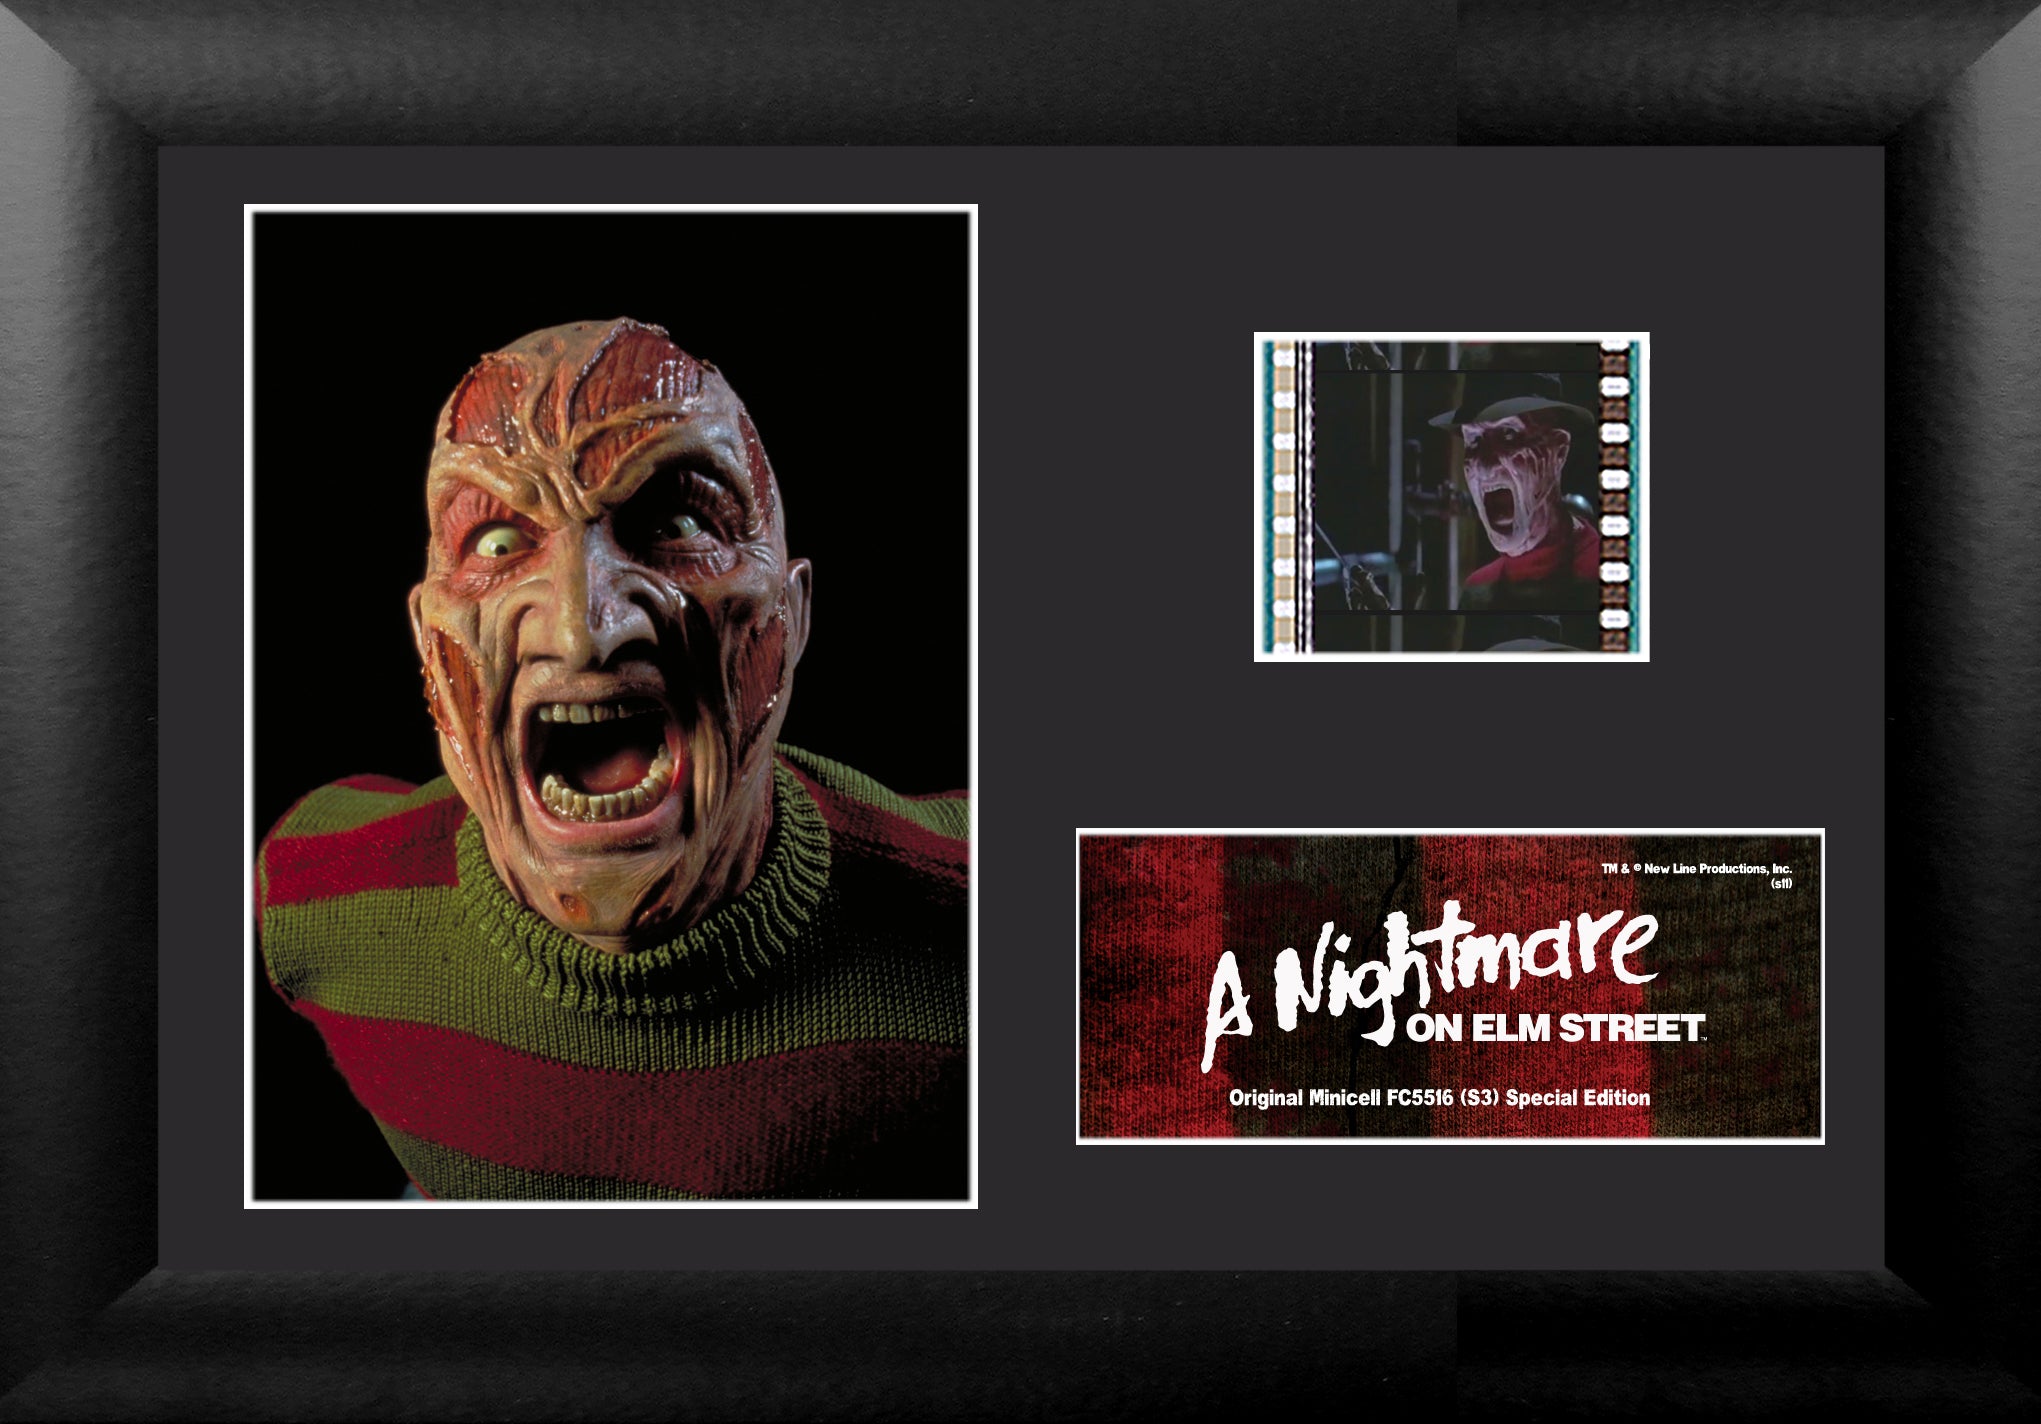 A Nightmare On Elm Street (Freddy Krueger) Minicell FilmCells Presentation with Easel Stand USFC5516